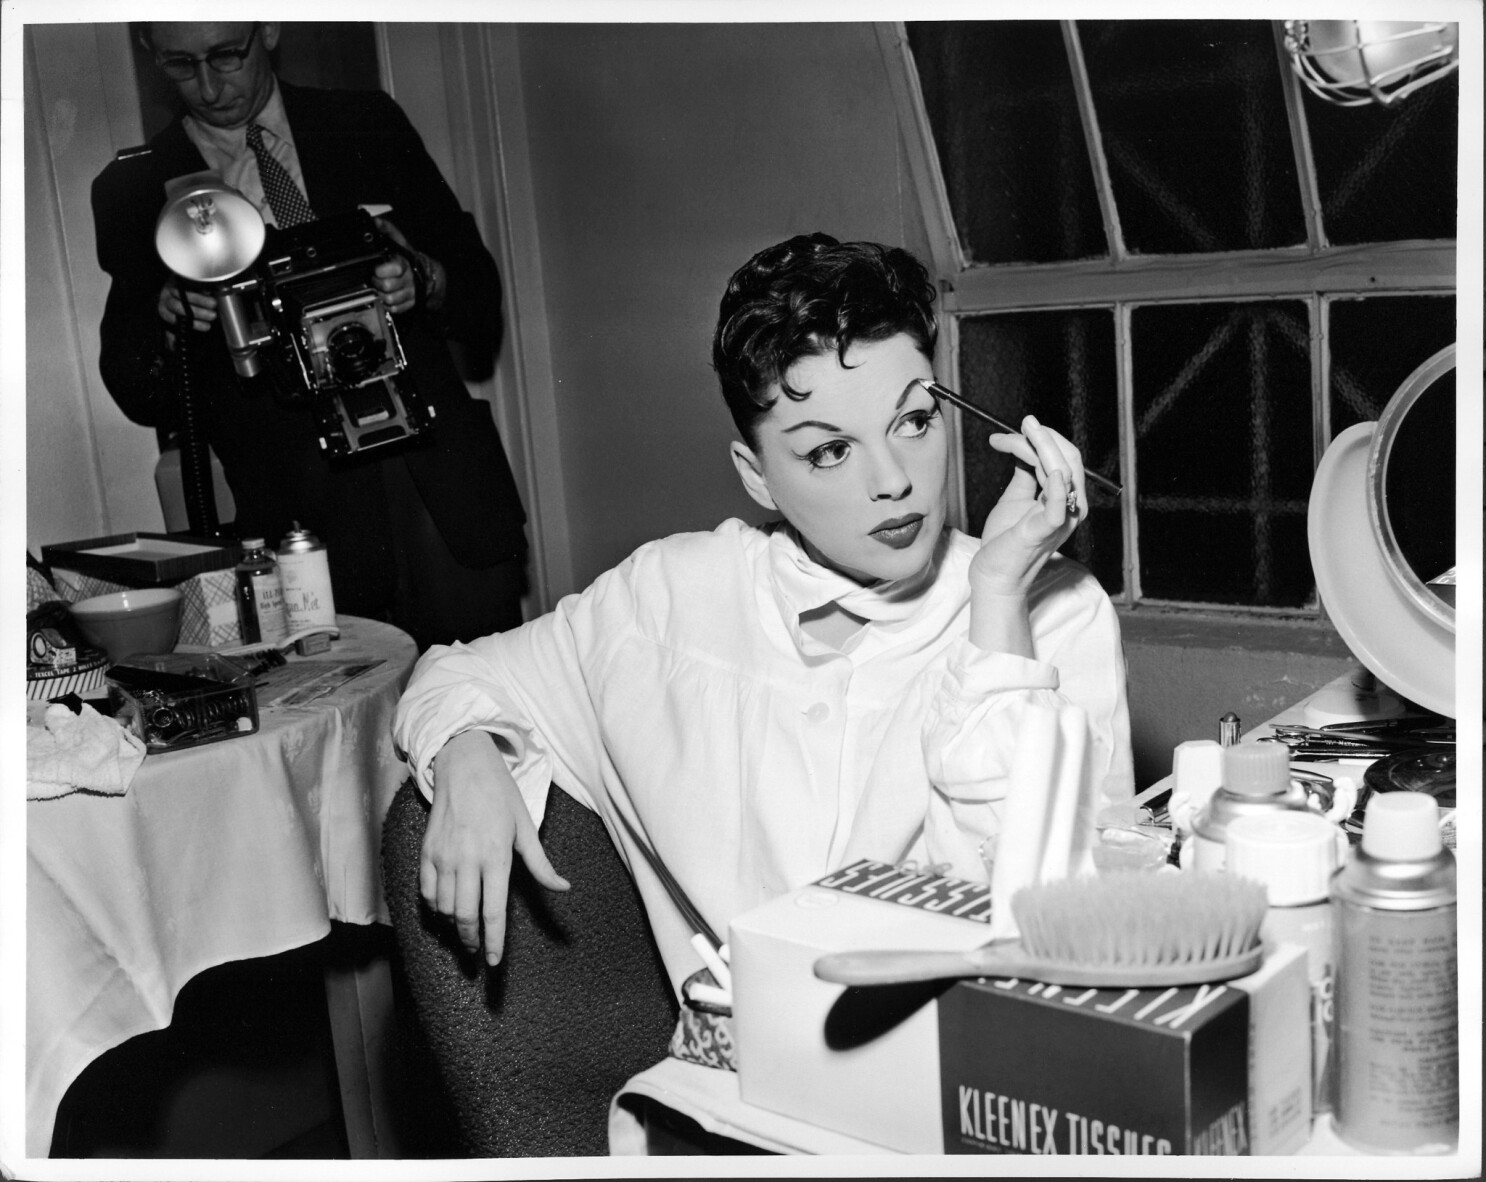 From The Archives Judy Garland Dies In London At 47 Tragedy Haunted Star Los Angeles Times Find out detailed reverse lookup information on. judy garland dies in london